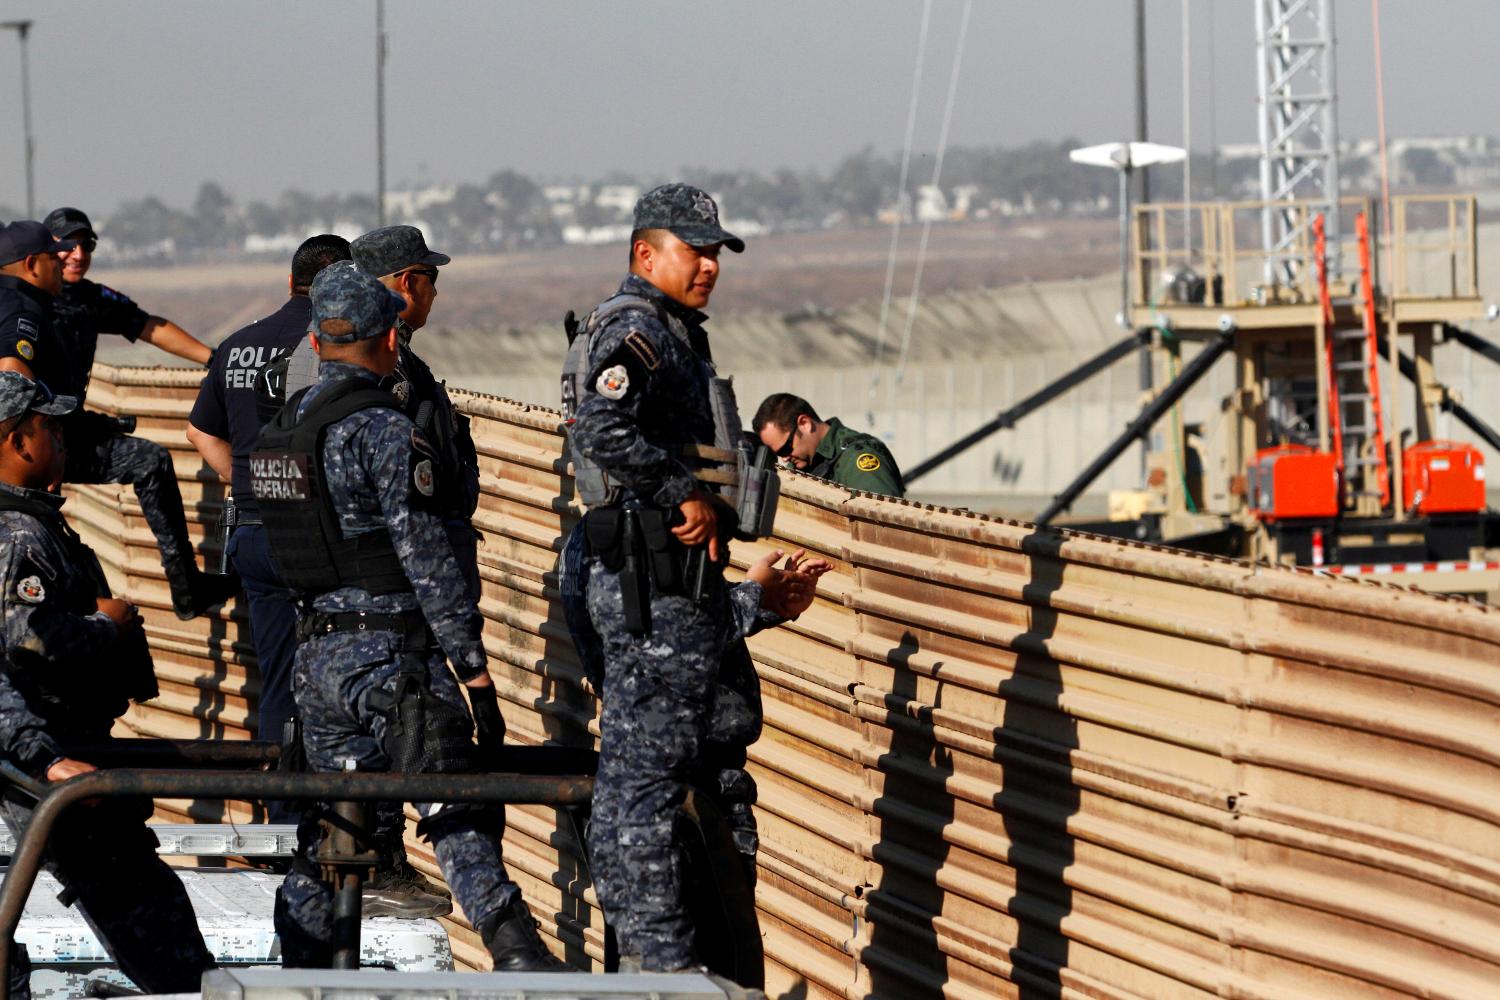 Mexican federal police officers look over the current border fence, while U.S. border patrol authorities (not pictured) visit the site where several prototypes for U.S. President Donald Trump's border wall with Mexico have been built, in this picture taken from the Mexican side of the border, in Tijuana, Mexico, October 26, 2017. REUTERS/Jorge Duenes - RC1DEABF0E80